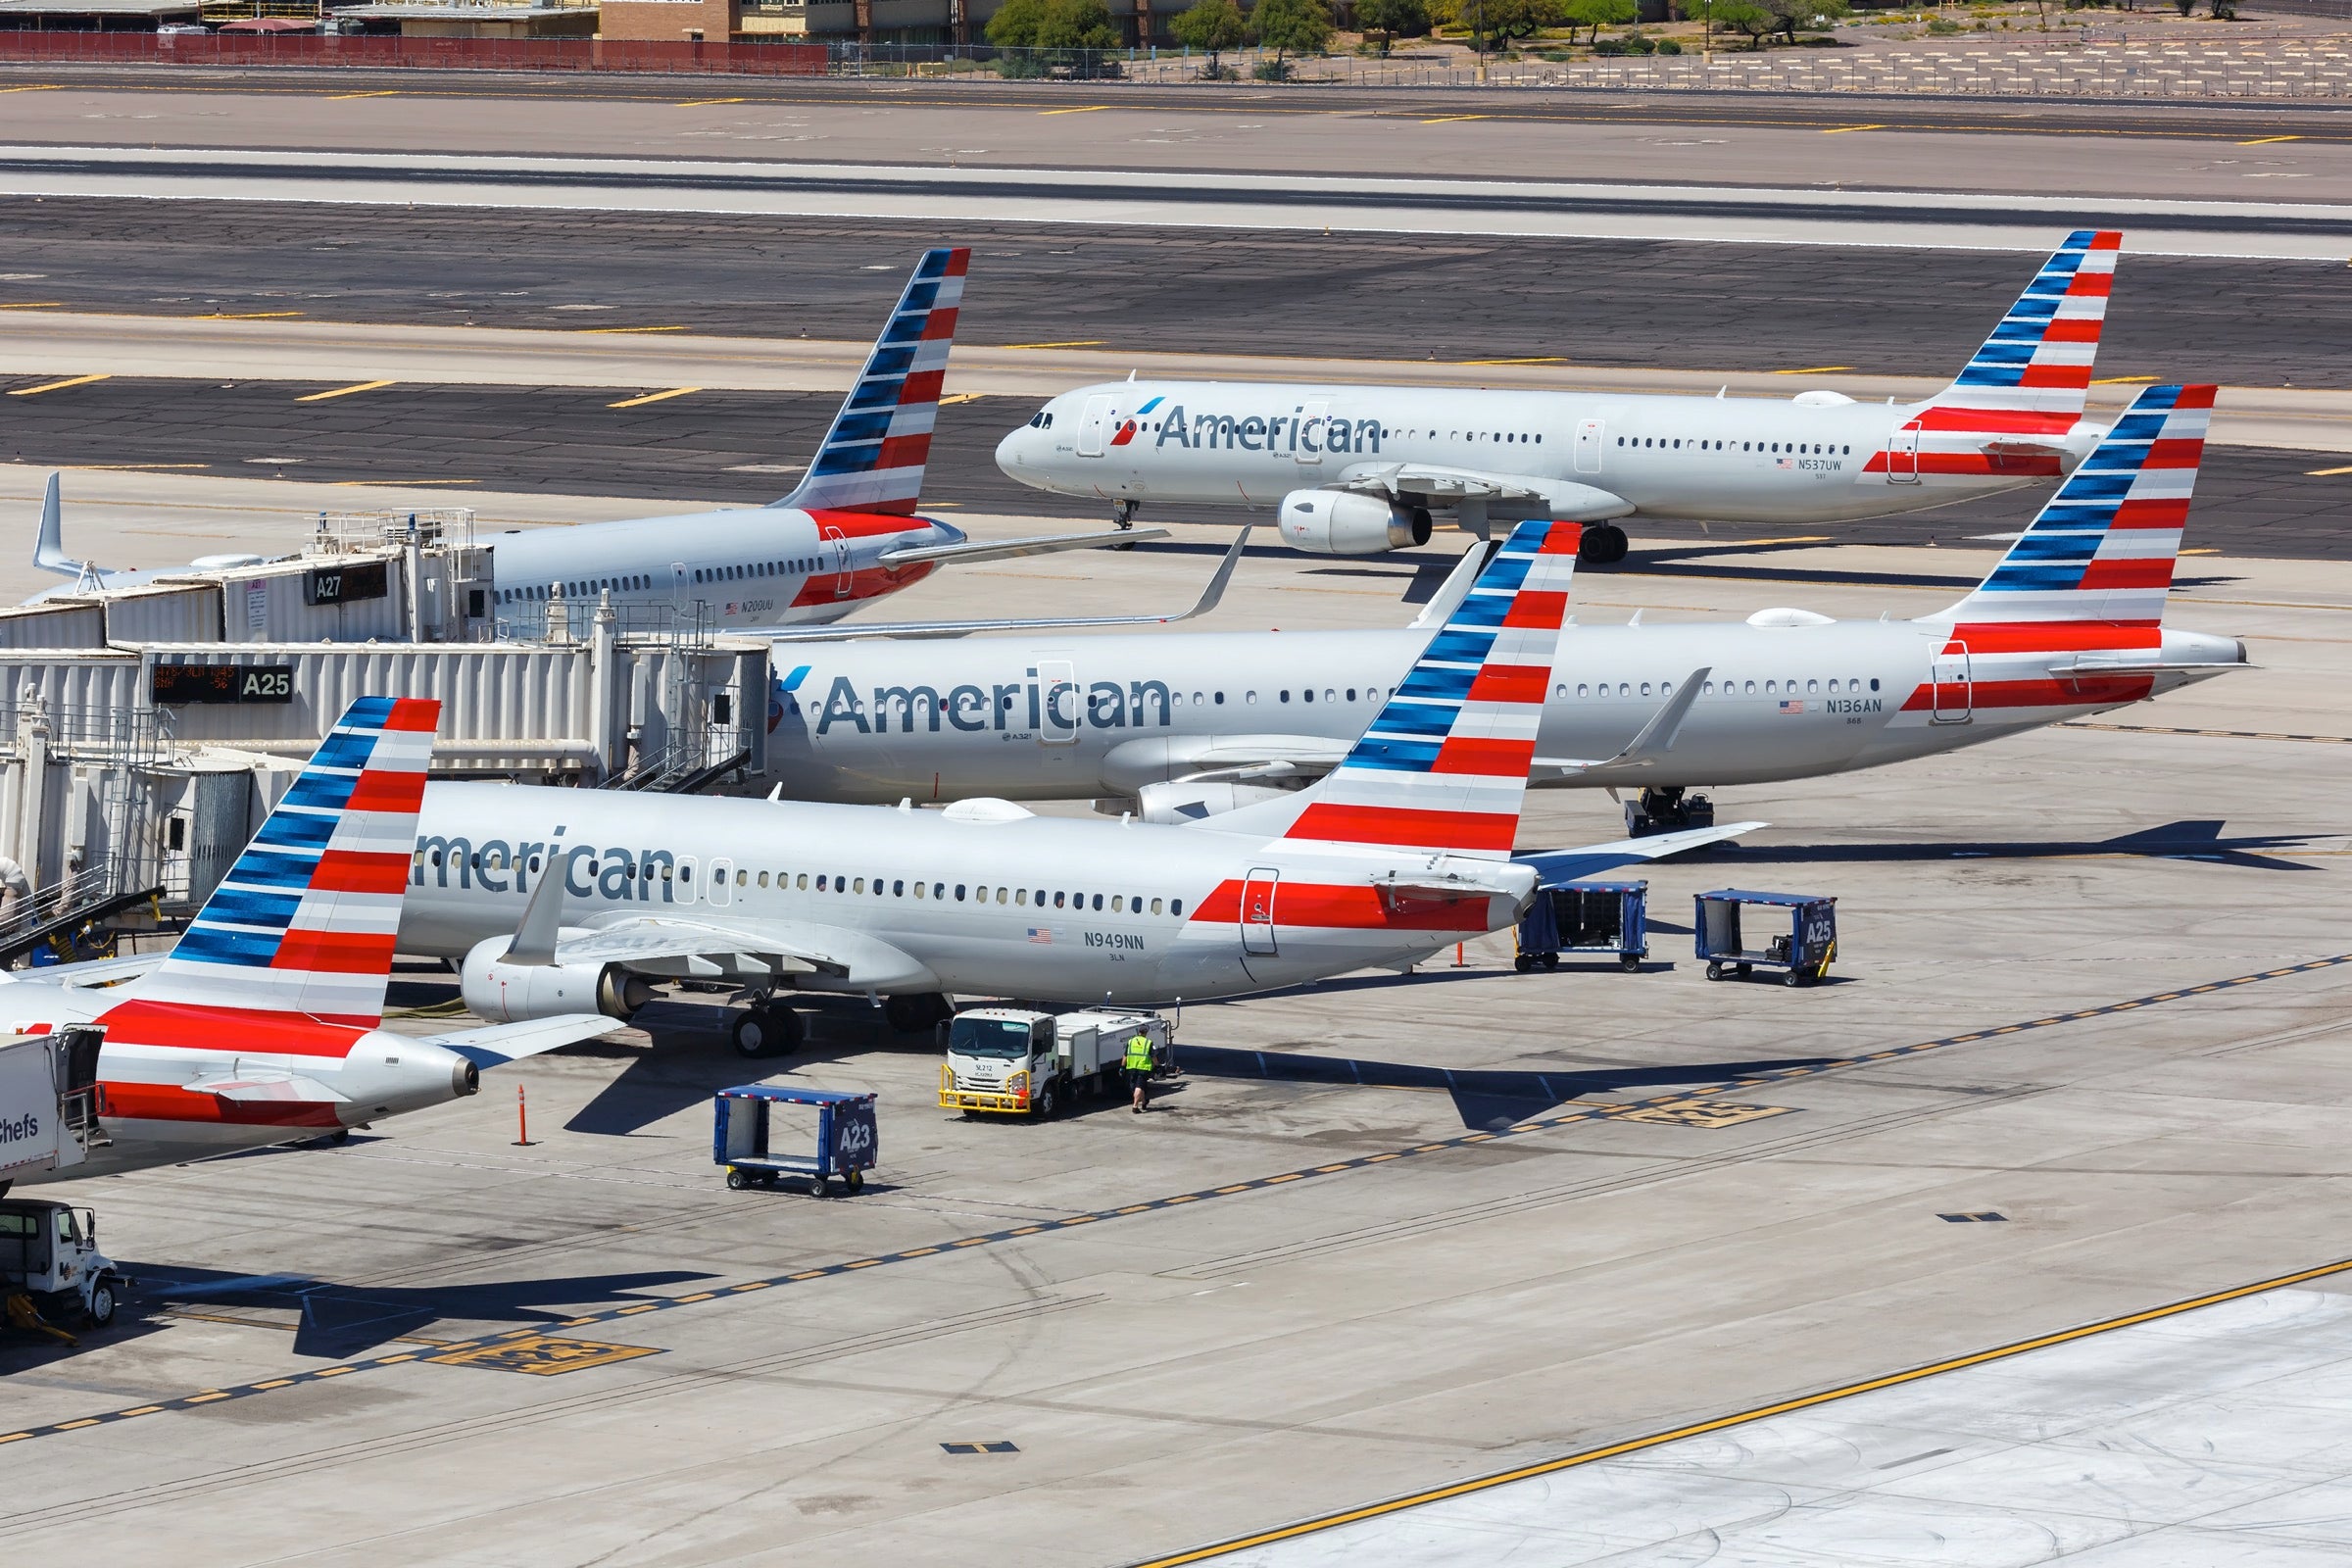 American Airlines jets in Phoenix